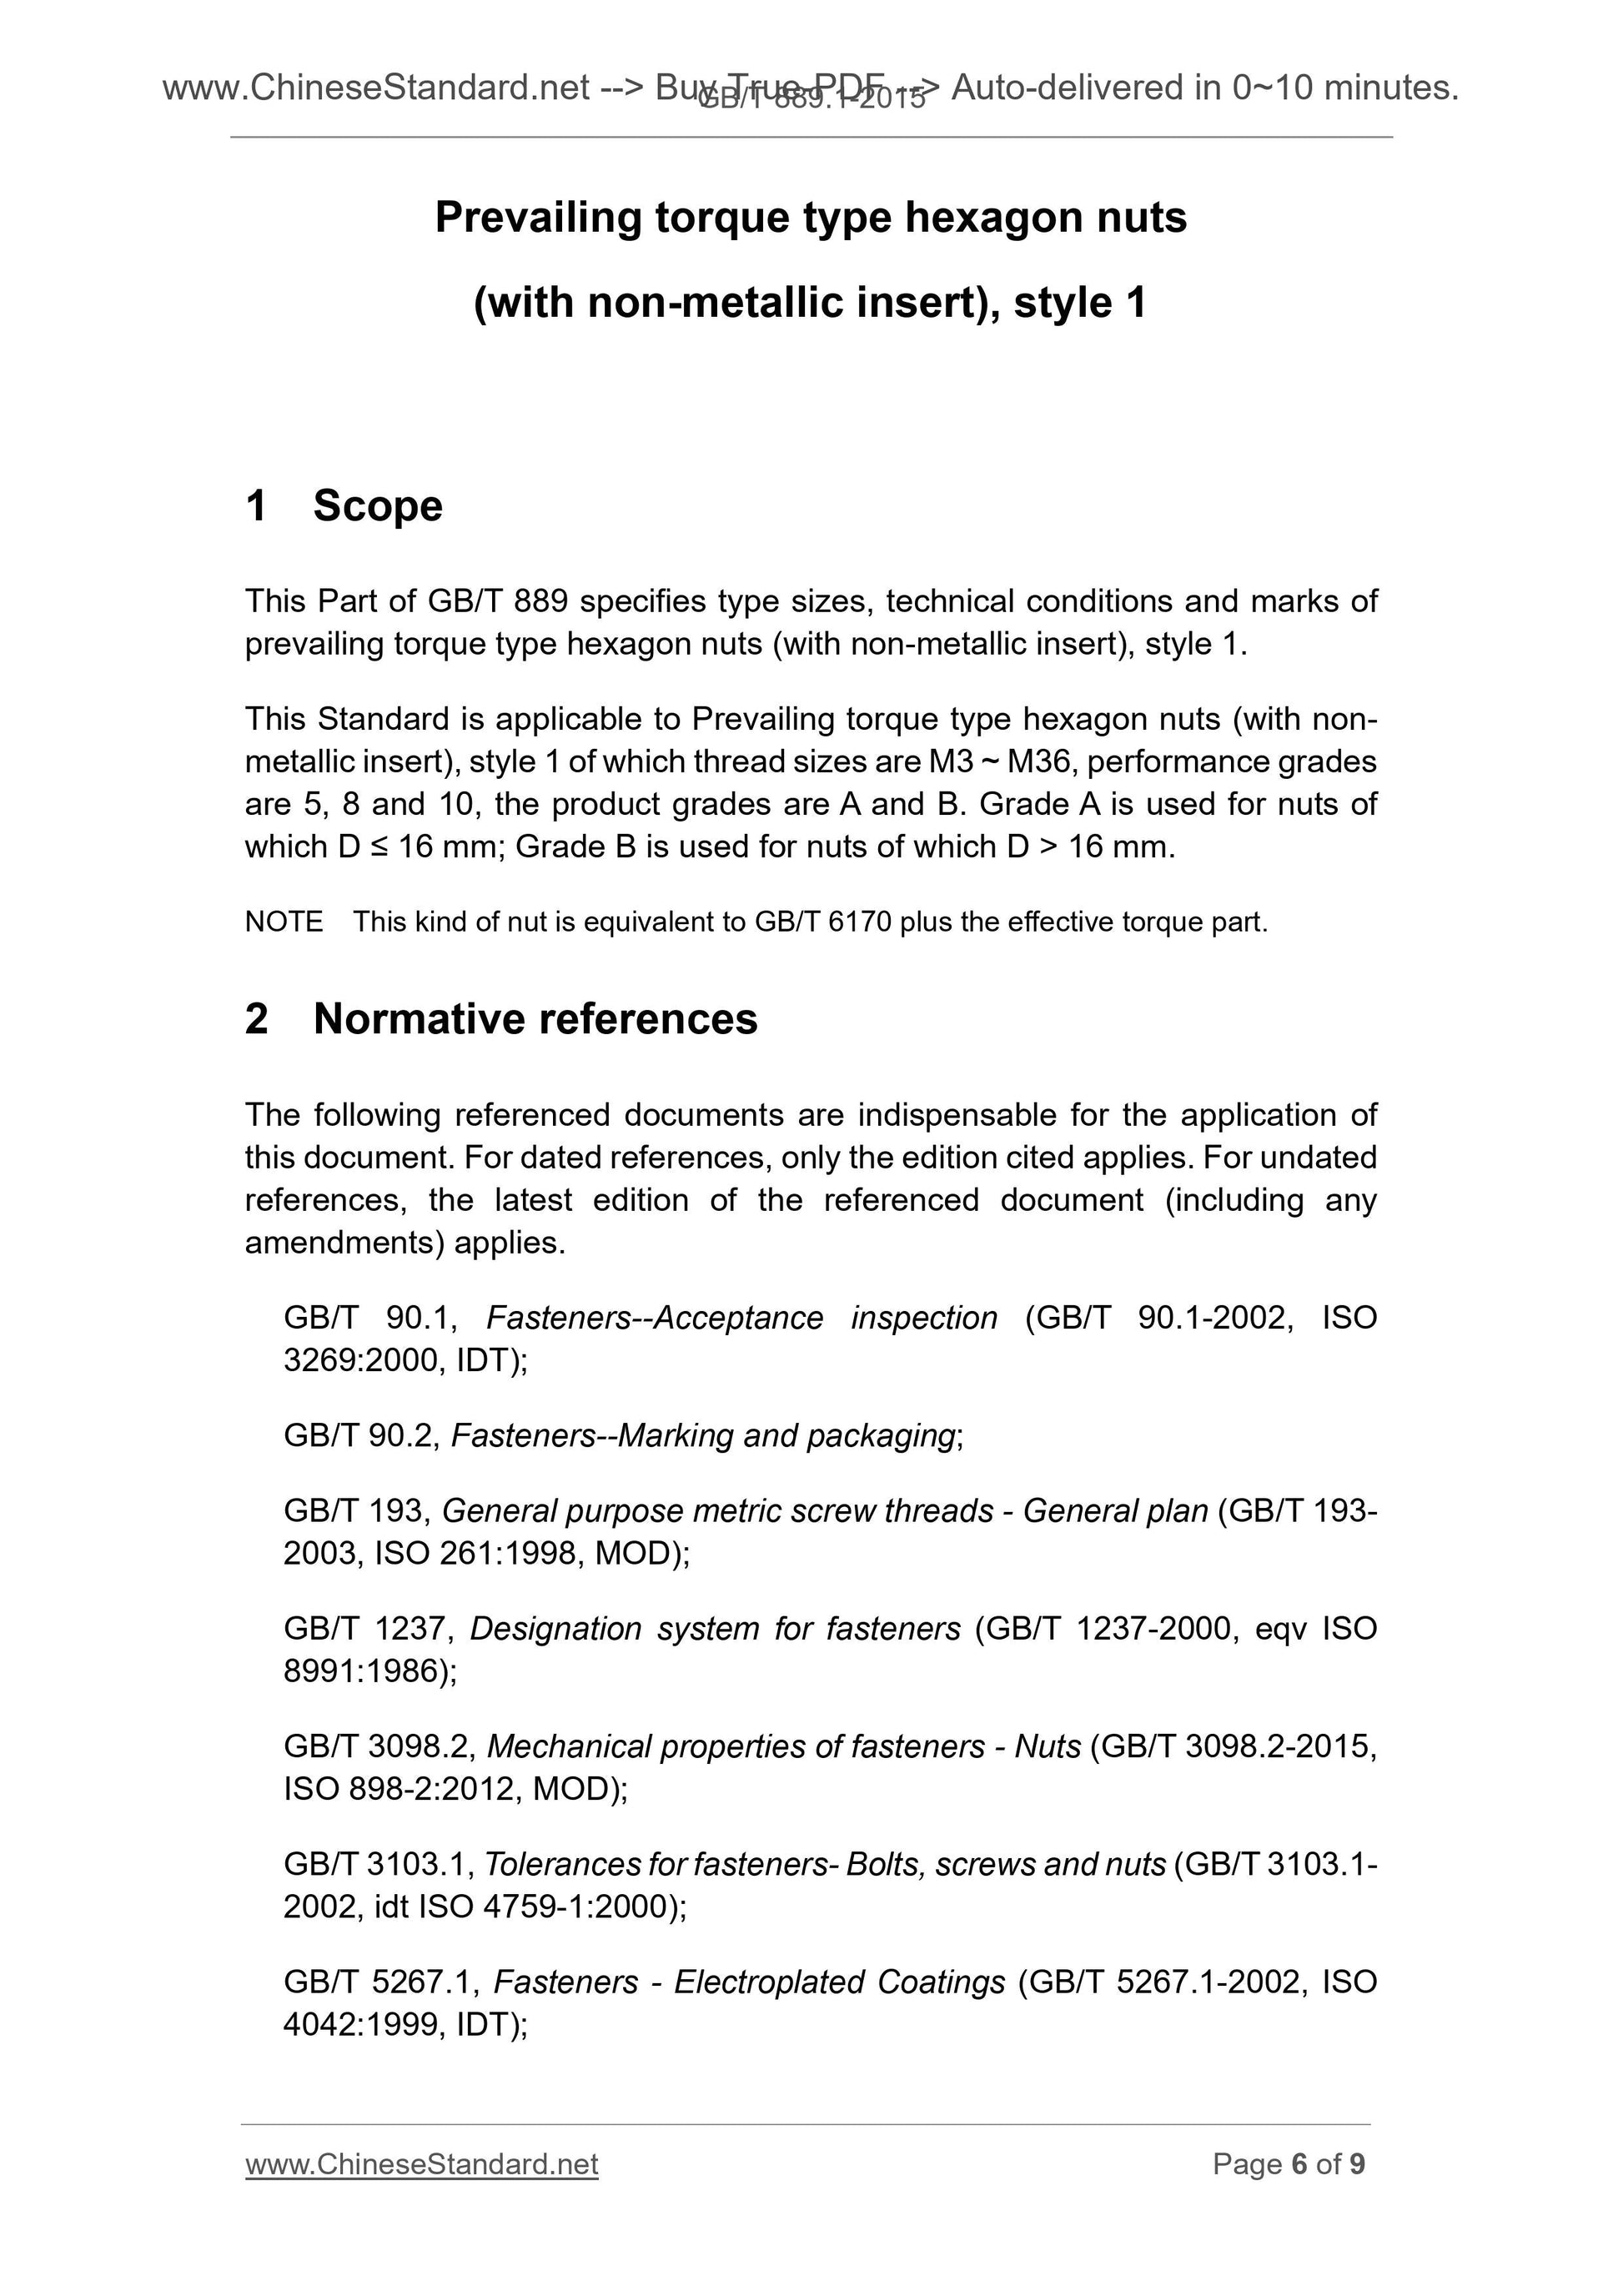 GB/T 889.1-2015 Page 5